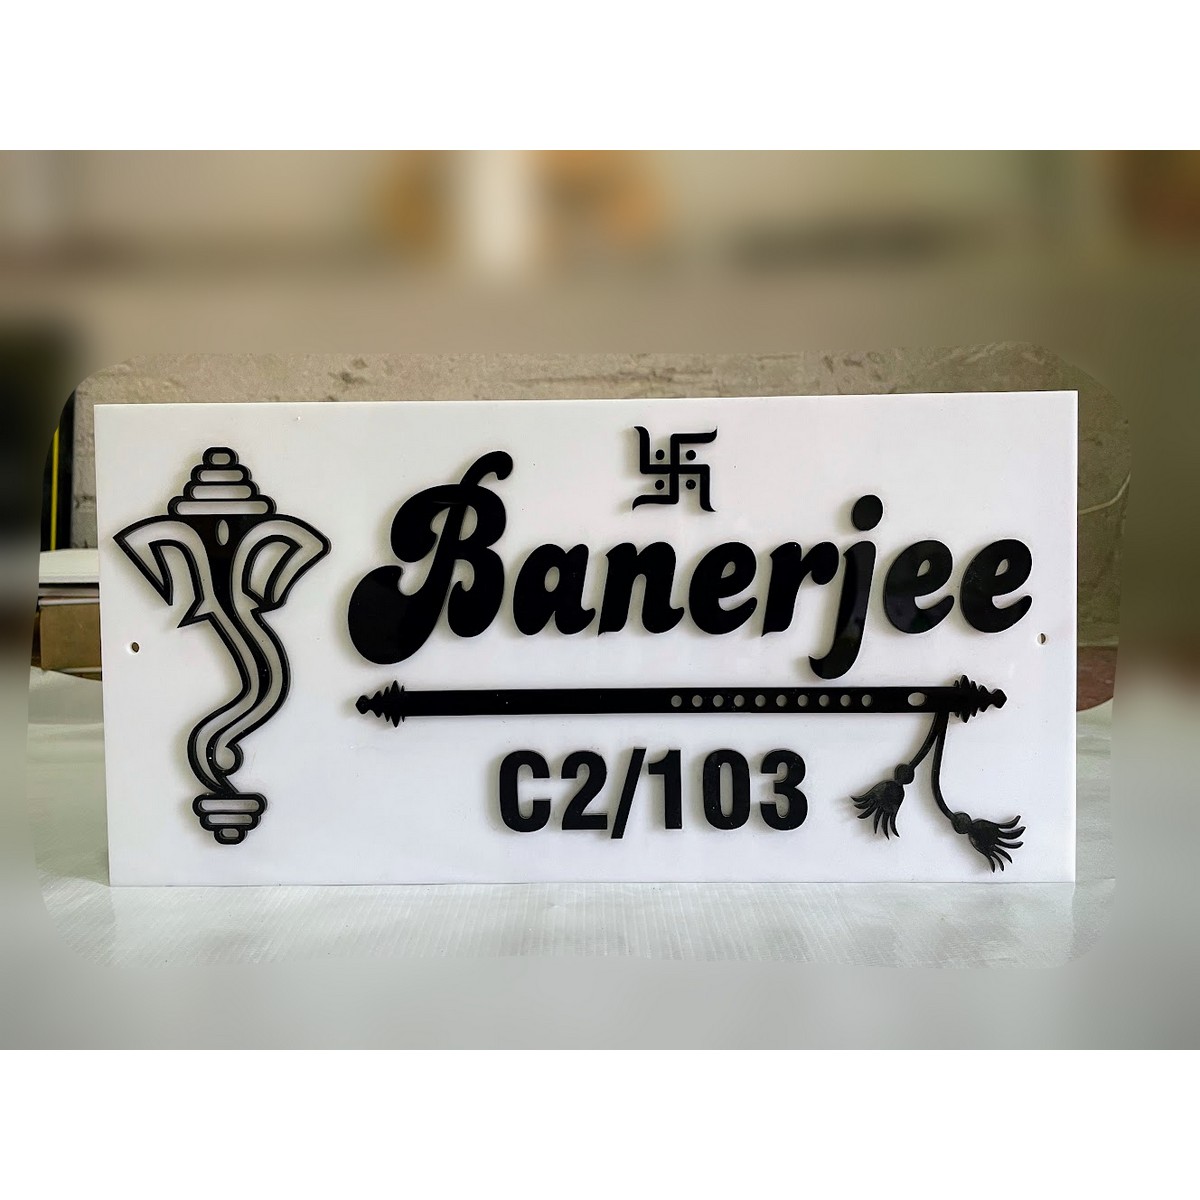 Banerjee Acrylic Home Name Plate - Personalized & Elegant Home Decor by My Interior Factory